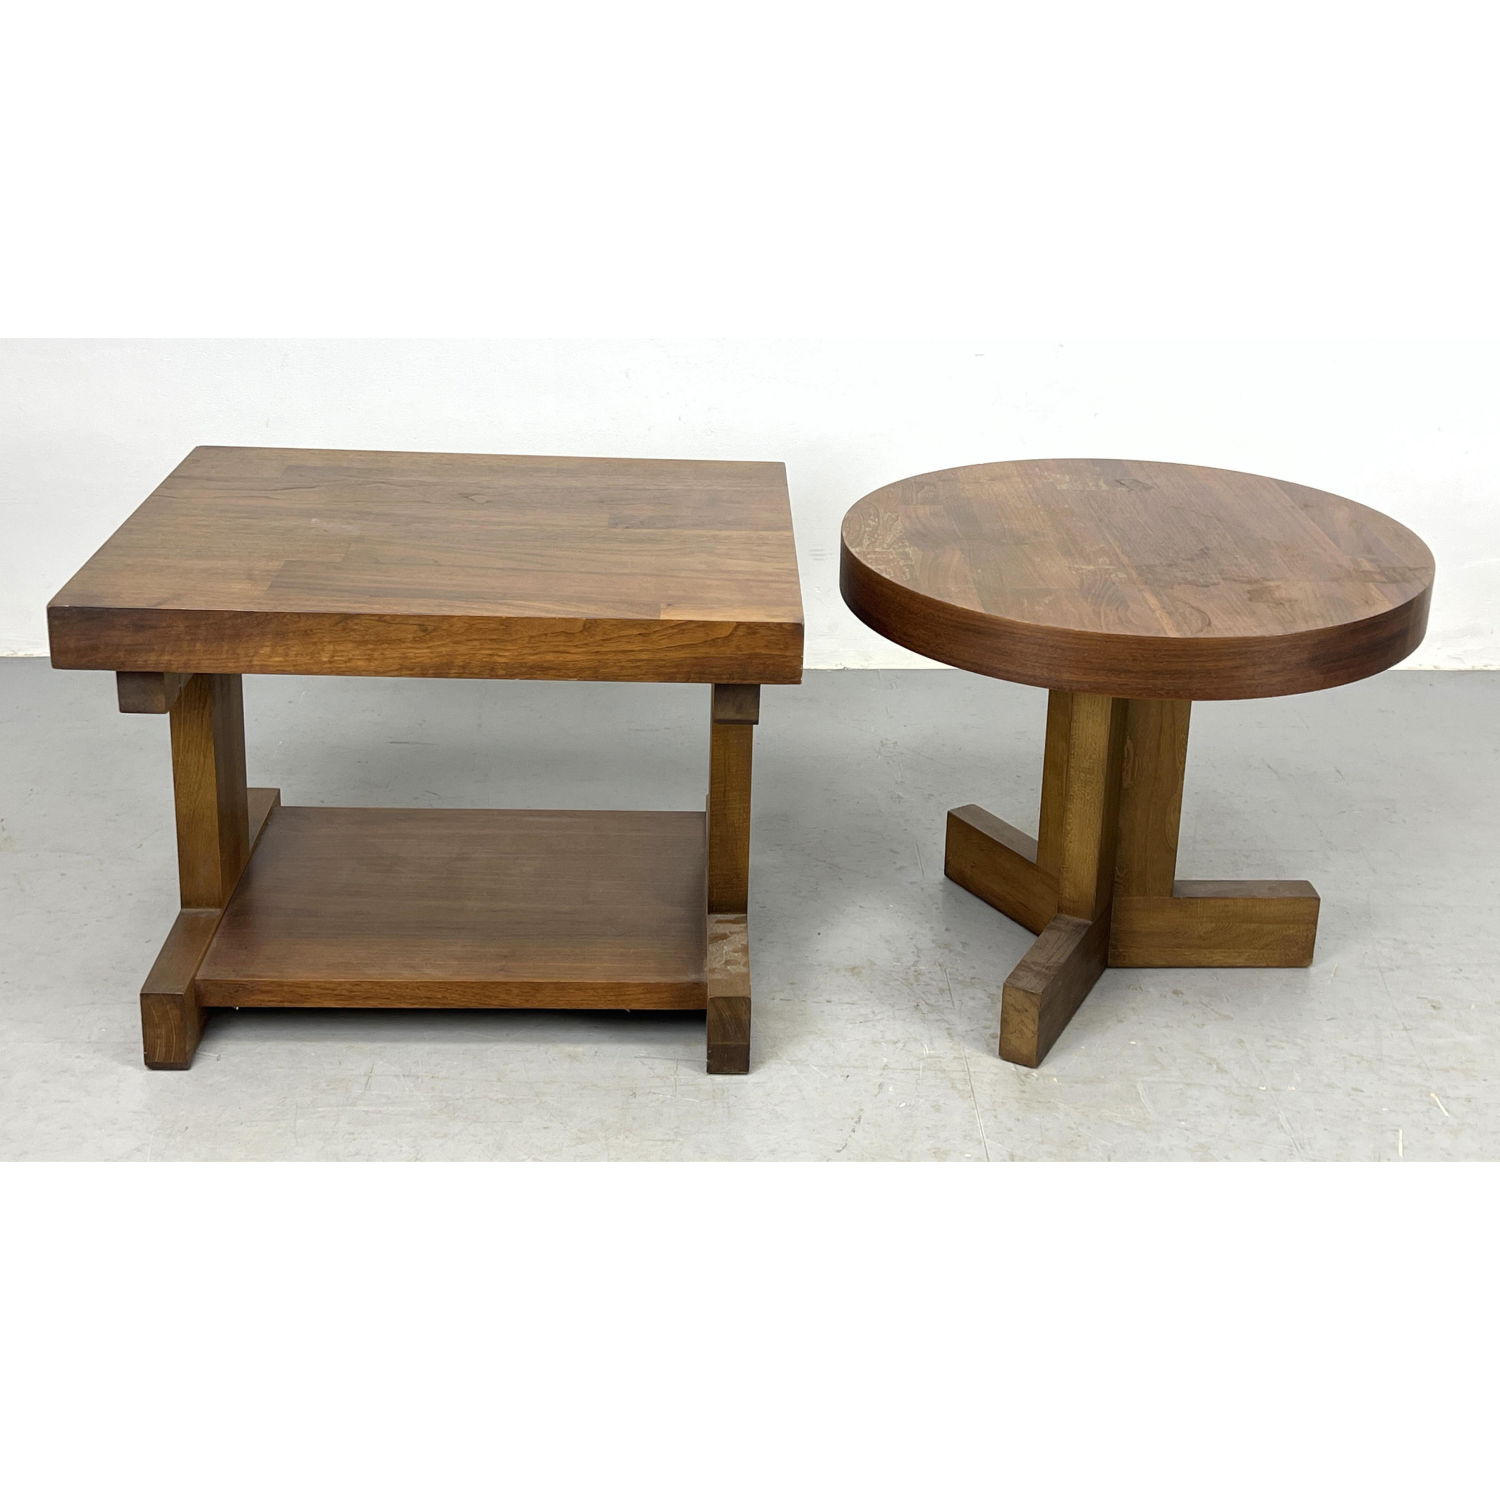 2pc Wood Side Tables. LANE Round